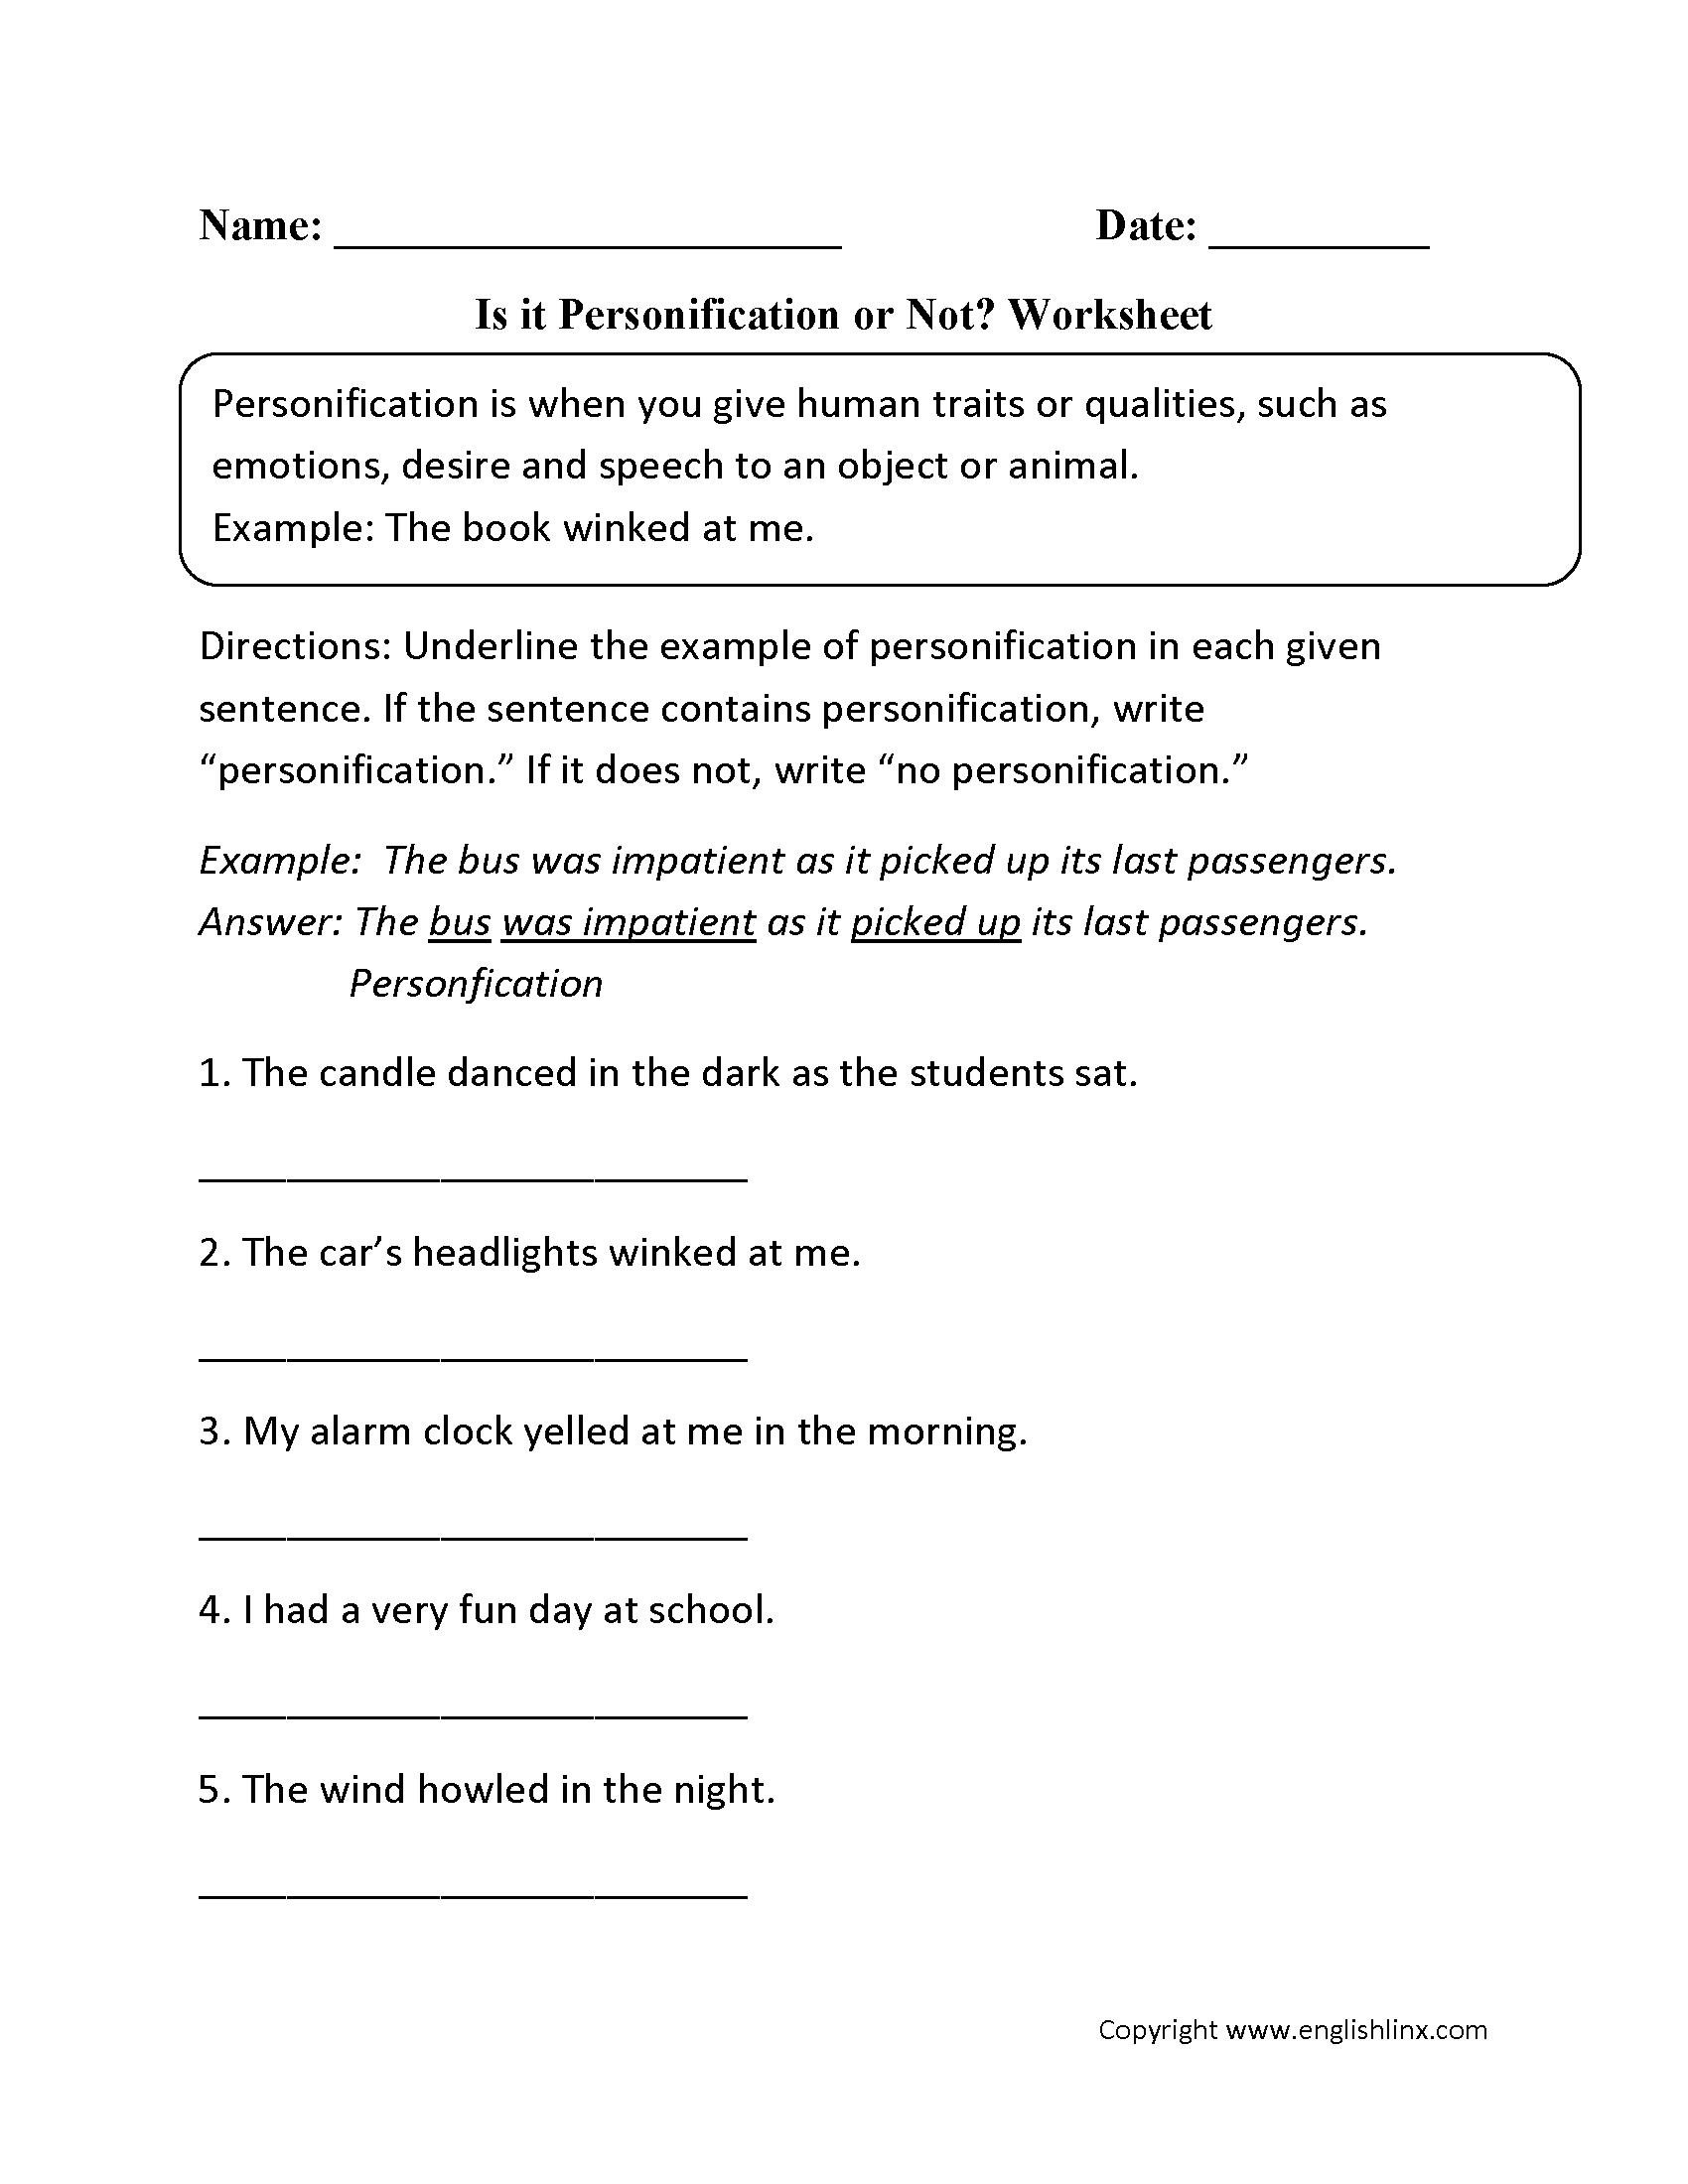 Is it Personification or Not? Worksheet